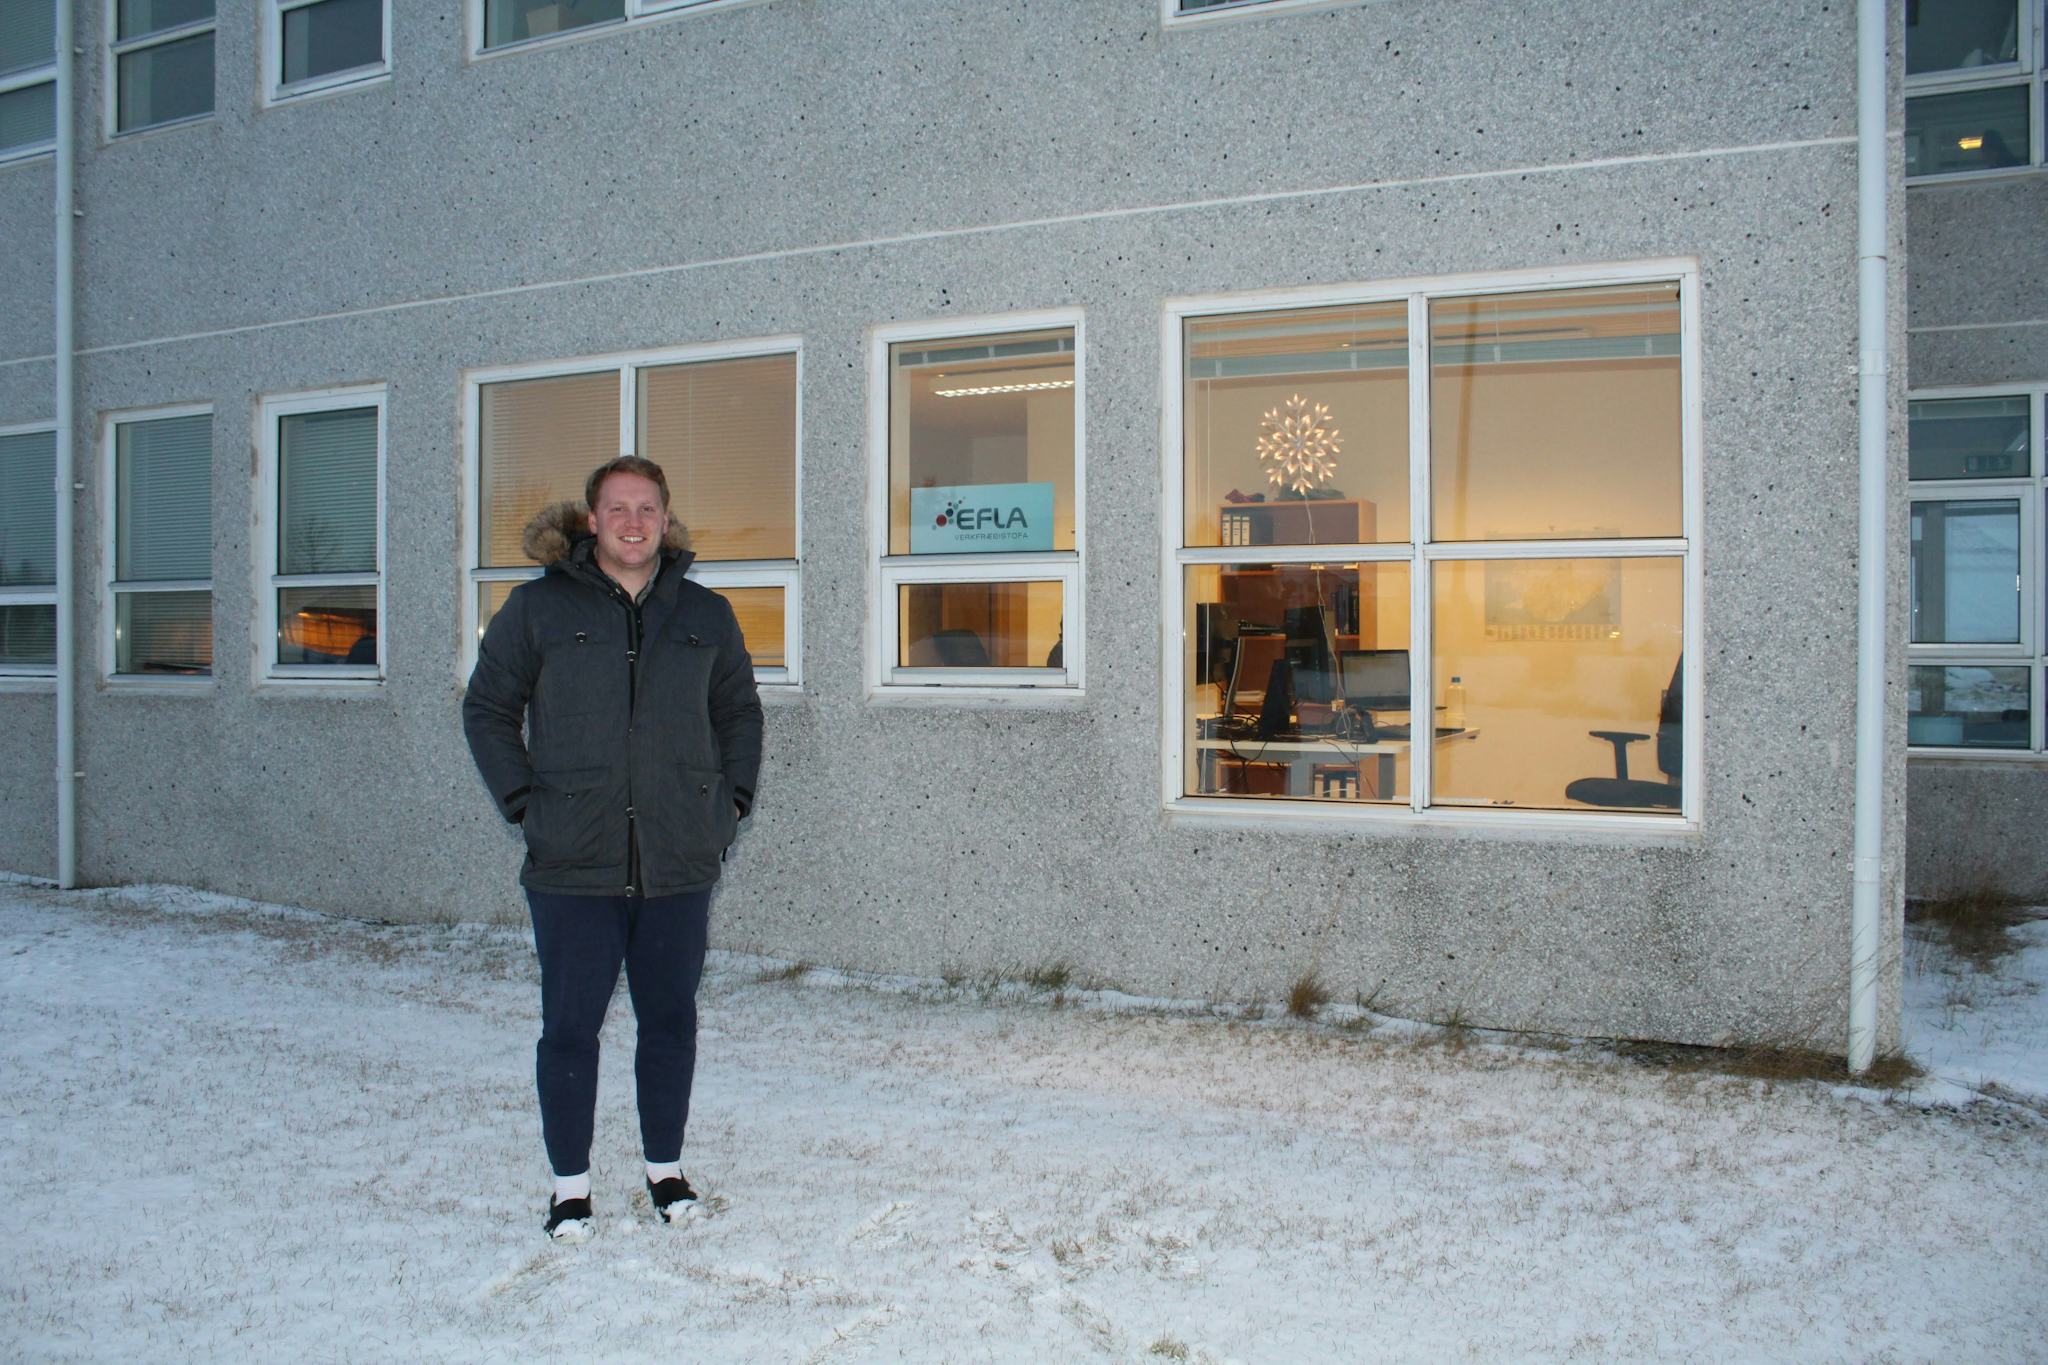 A man standing outside a building with windows that shows the interior space